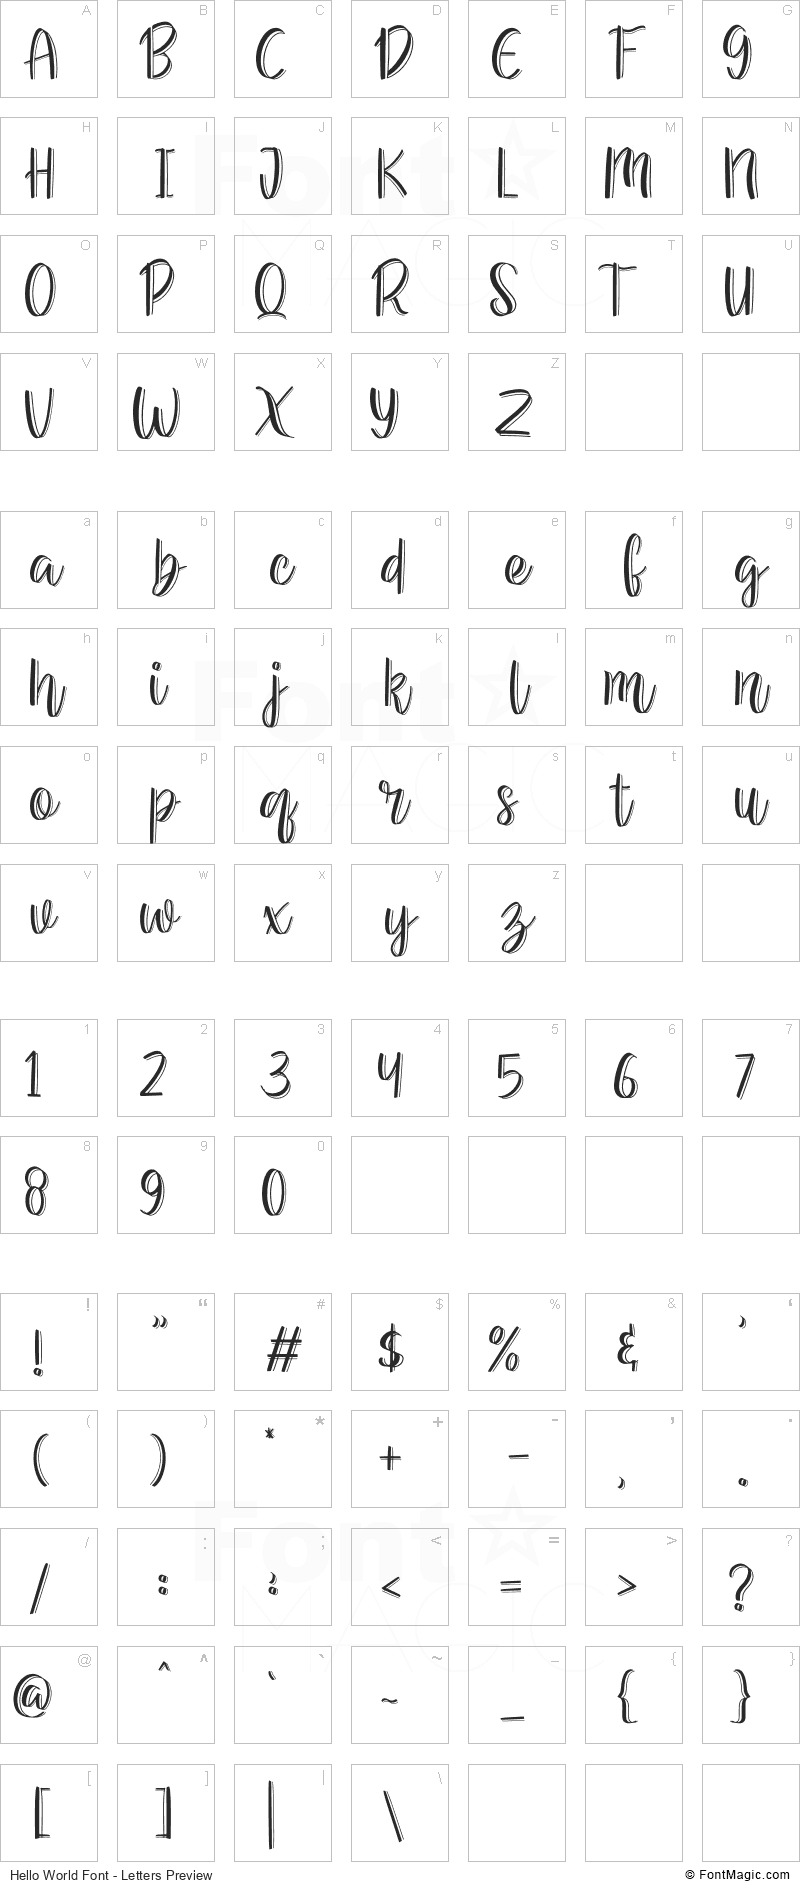 Hello World Font - All Latters Preview Chart